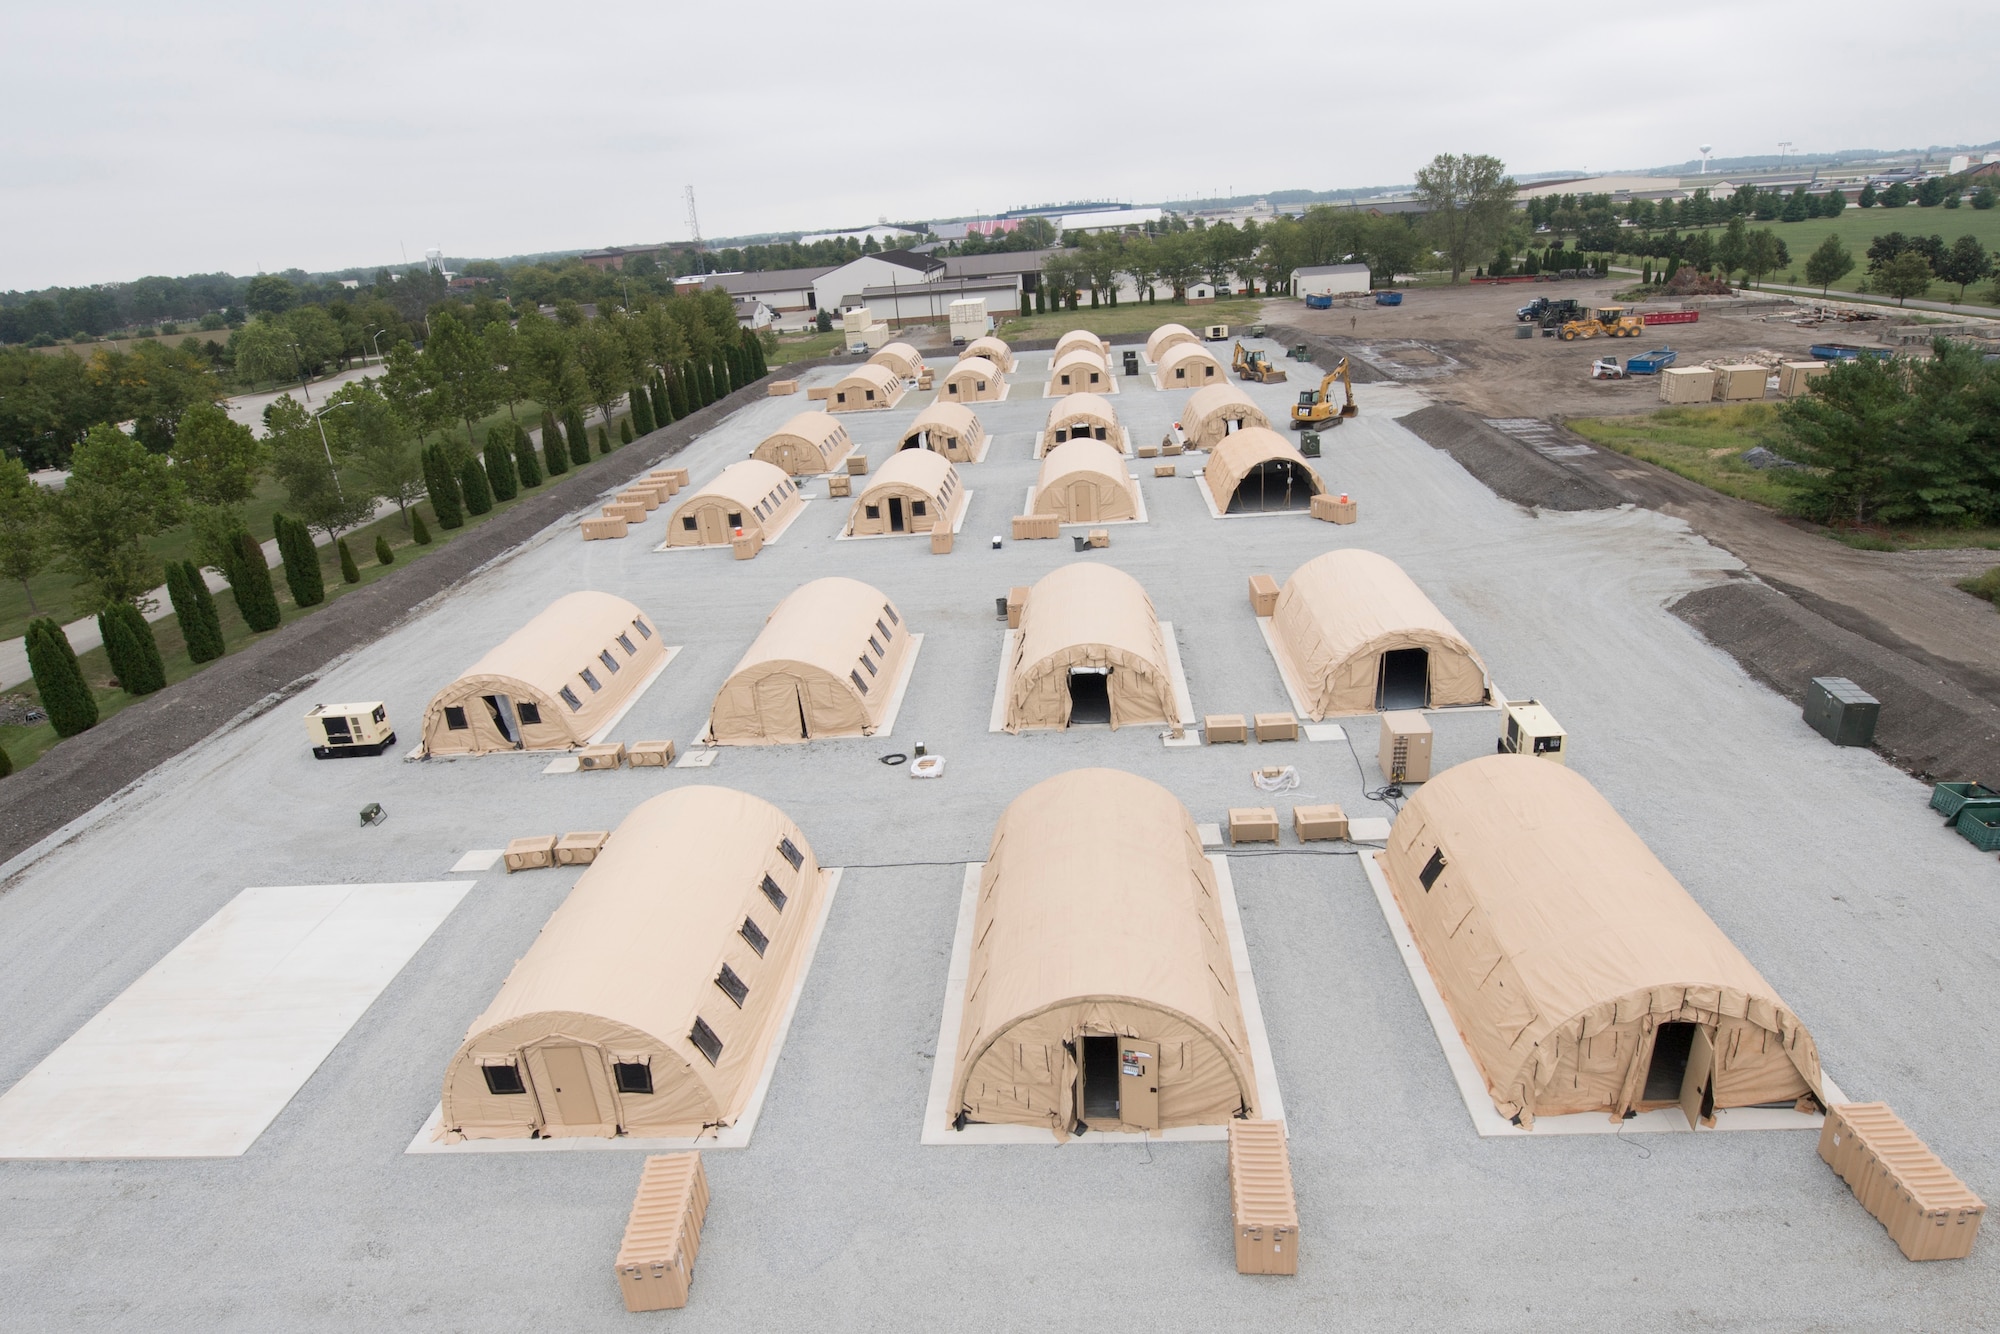 Airmen from the 434th Civil Engineer Squadron recently set up a bare base with 24 tents, in roughly 10 hours. The new site consists of multiple concrete pads, much like the ones found in a deployed environment, allowing engineers to participate in a realistic deployed scenario. (U.S. Air Force photo/Master Sgt. Ben Mota)